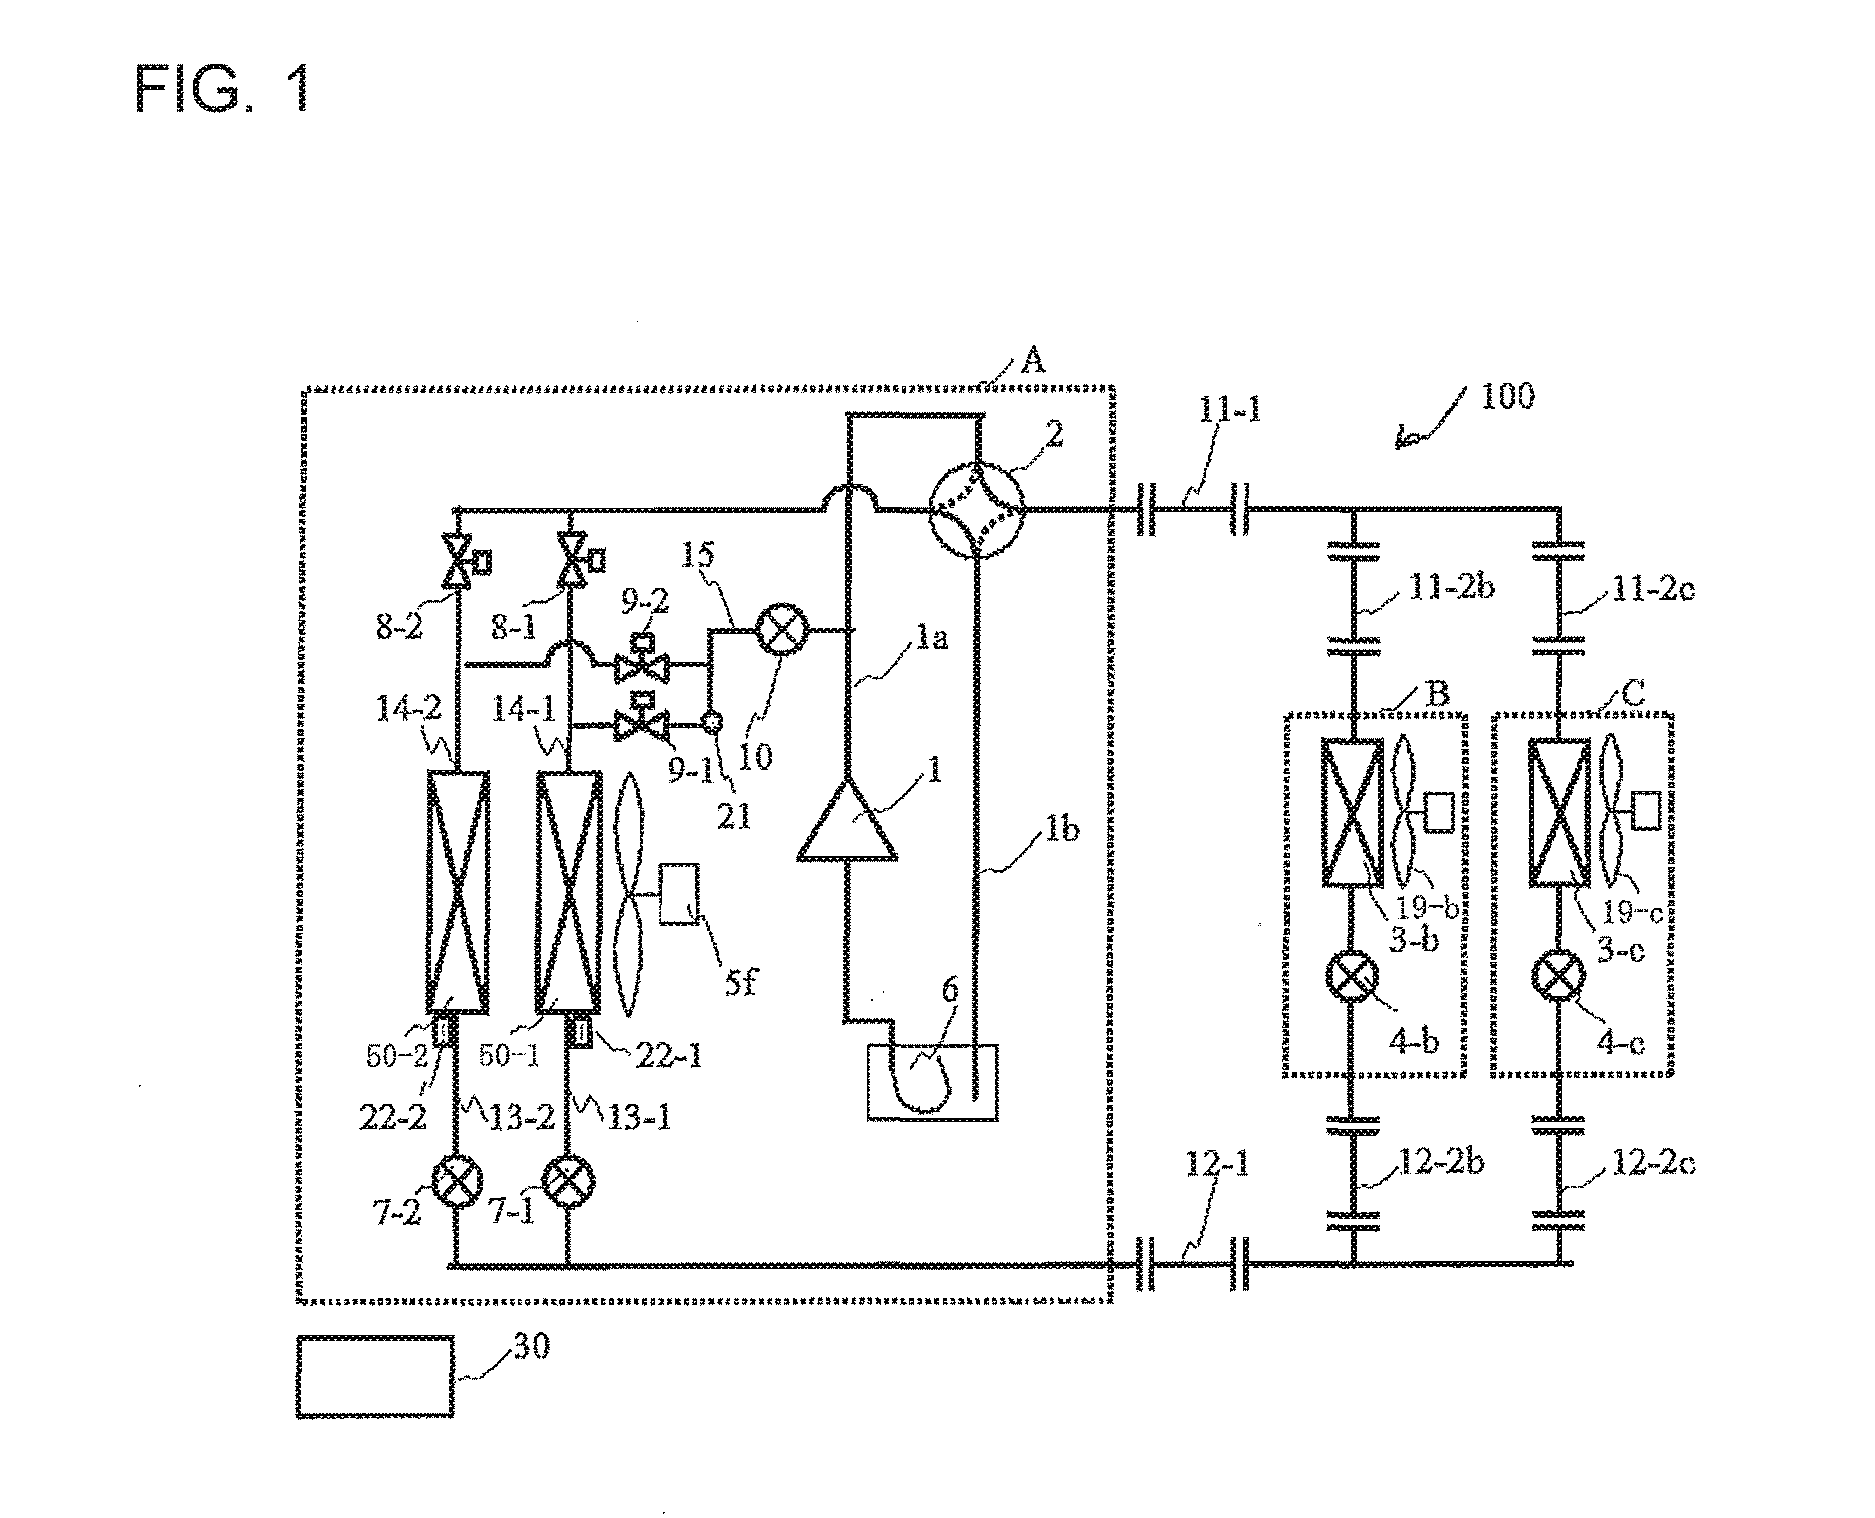 Heat source side unit and refrigeration cycle apparatus